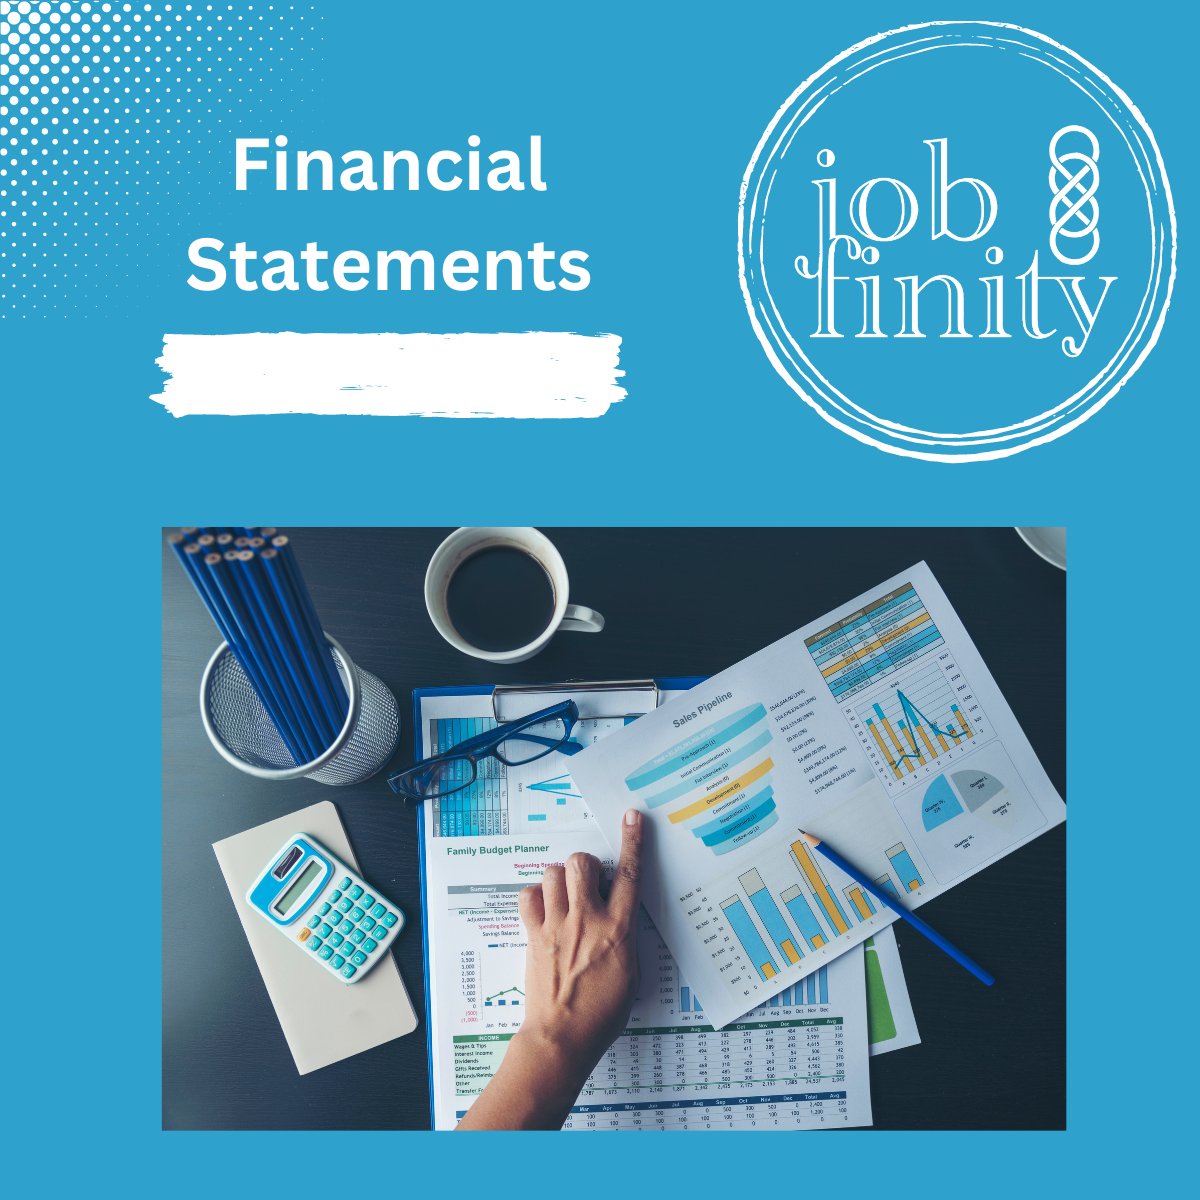 Financial statements are more than just numbers—they're a window into the heart of a business. As pillars of transparency and accountability, they provide invaluable insights into a company's financial health and performance.💼💡

#FinancialStatements #Insights #Jobfinity